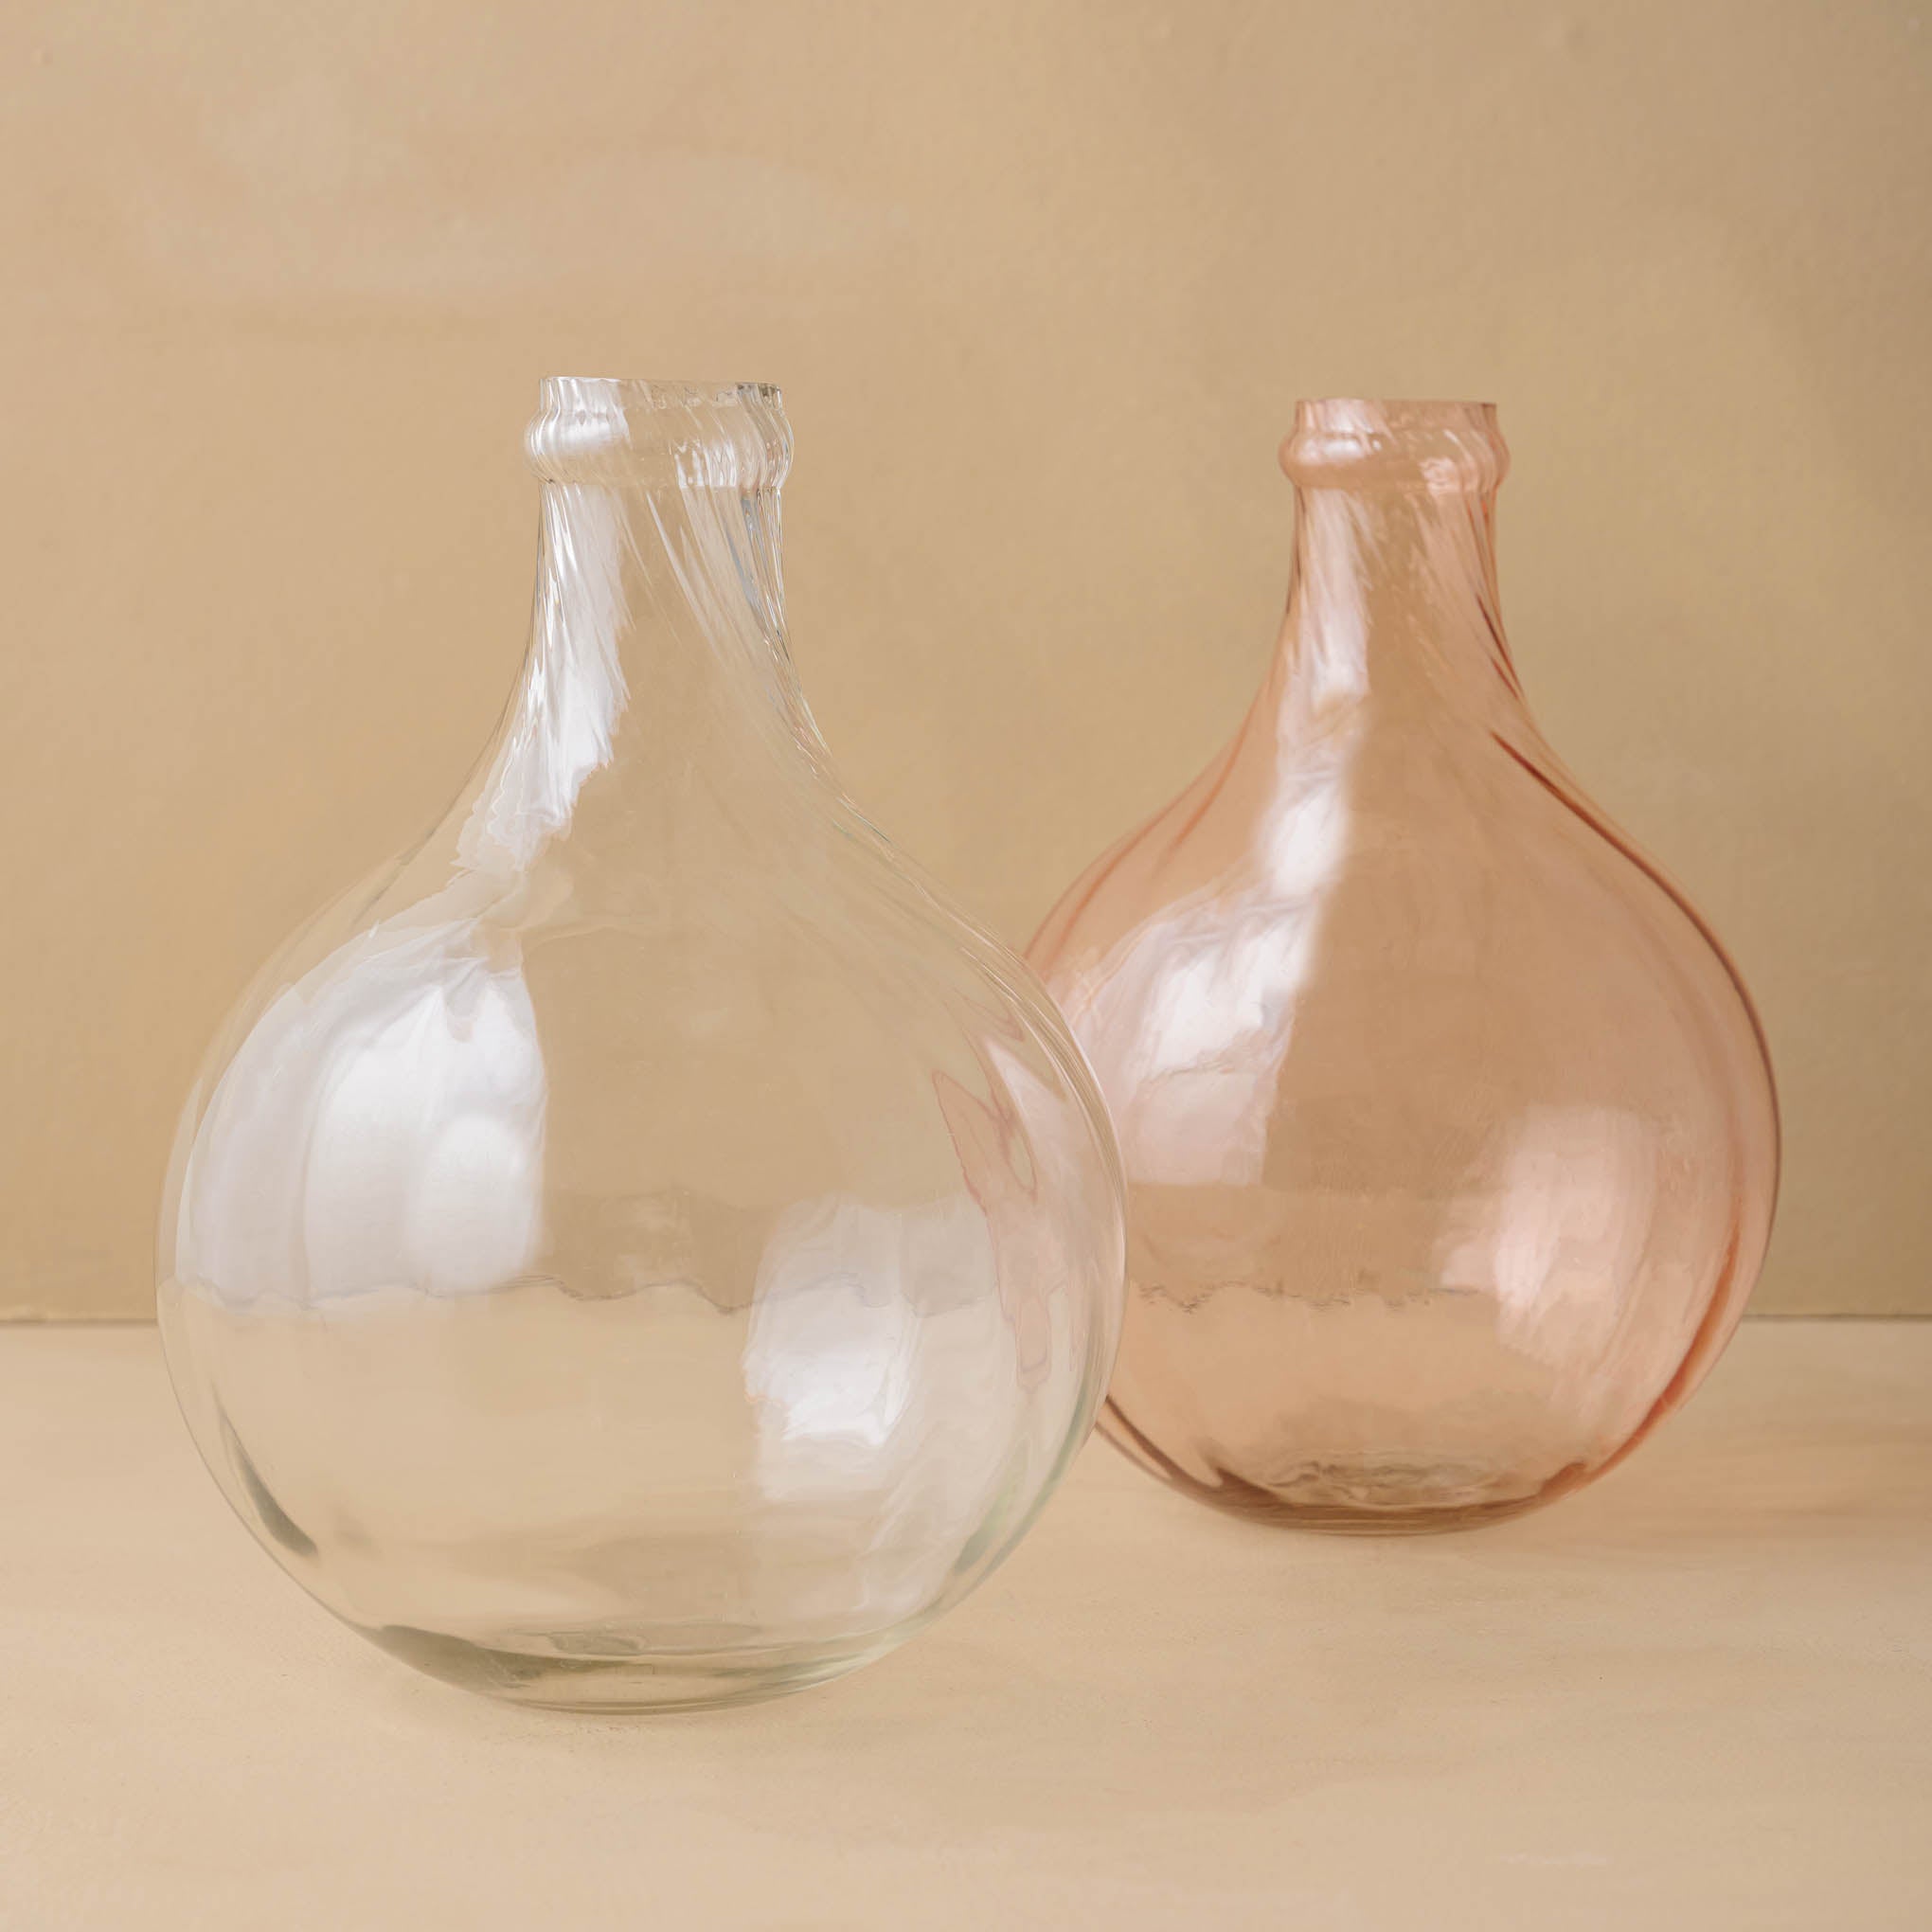 Penelope Fluted glass Vases in peach and clear On sale for $19.20, discounted from $32.00